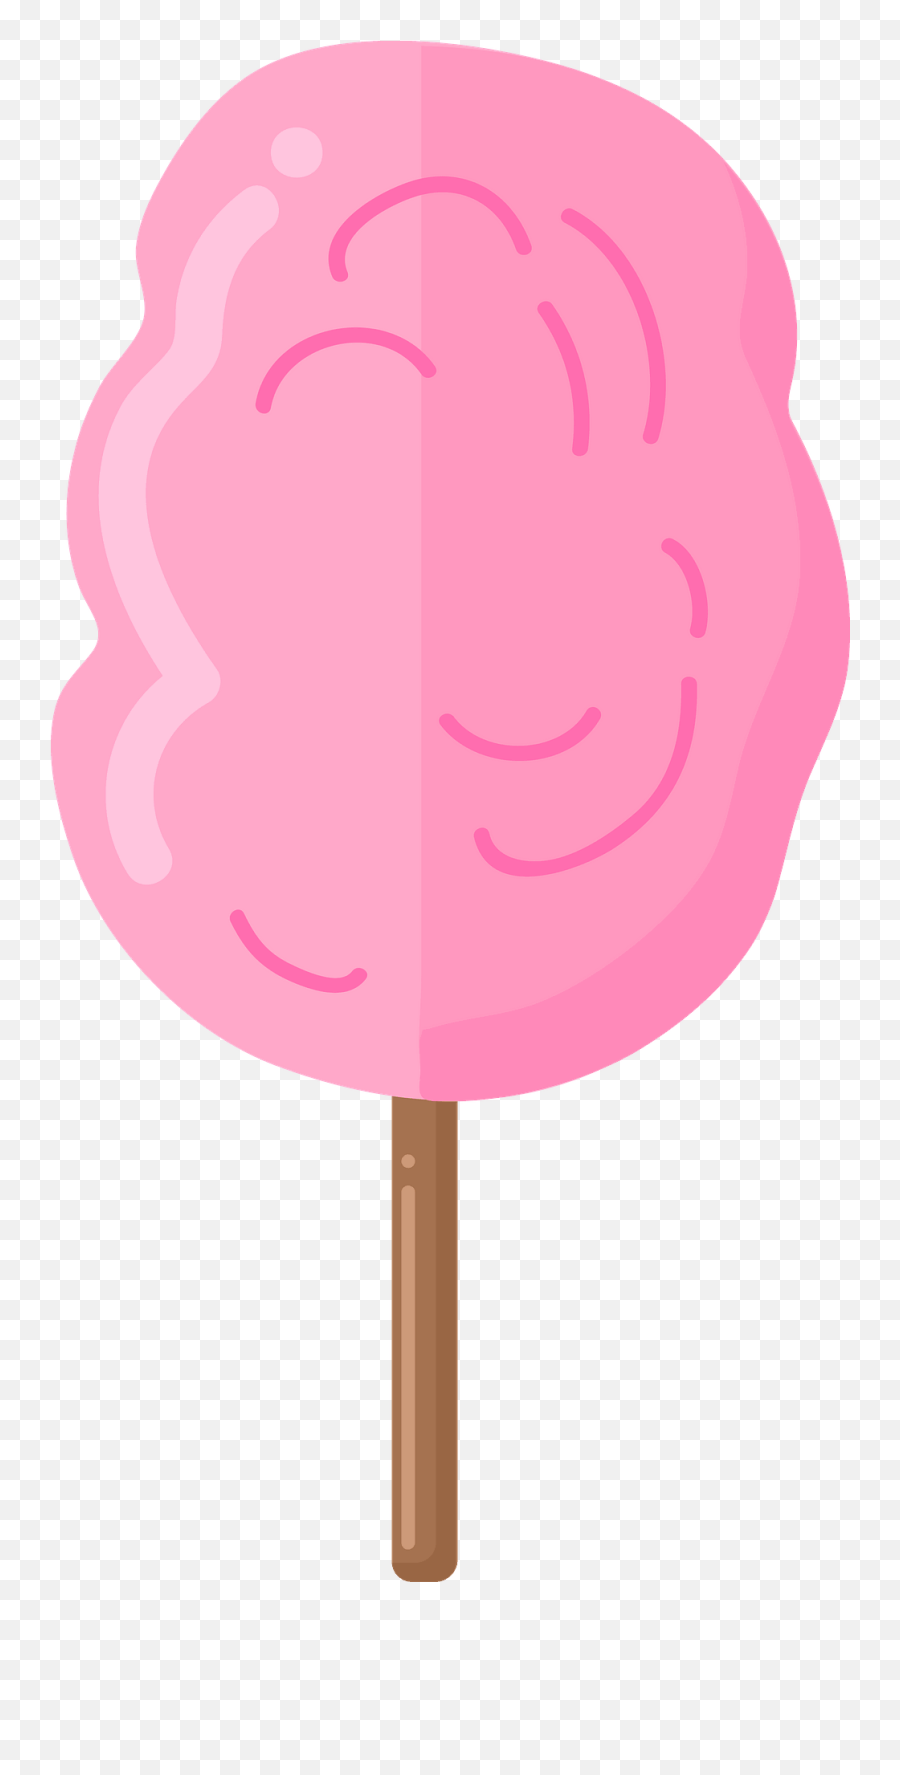 Cotton Candy Clipart - Girly Emoji,Cotton Candy Clipart